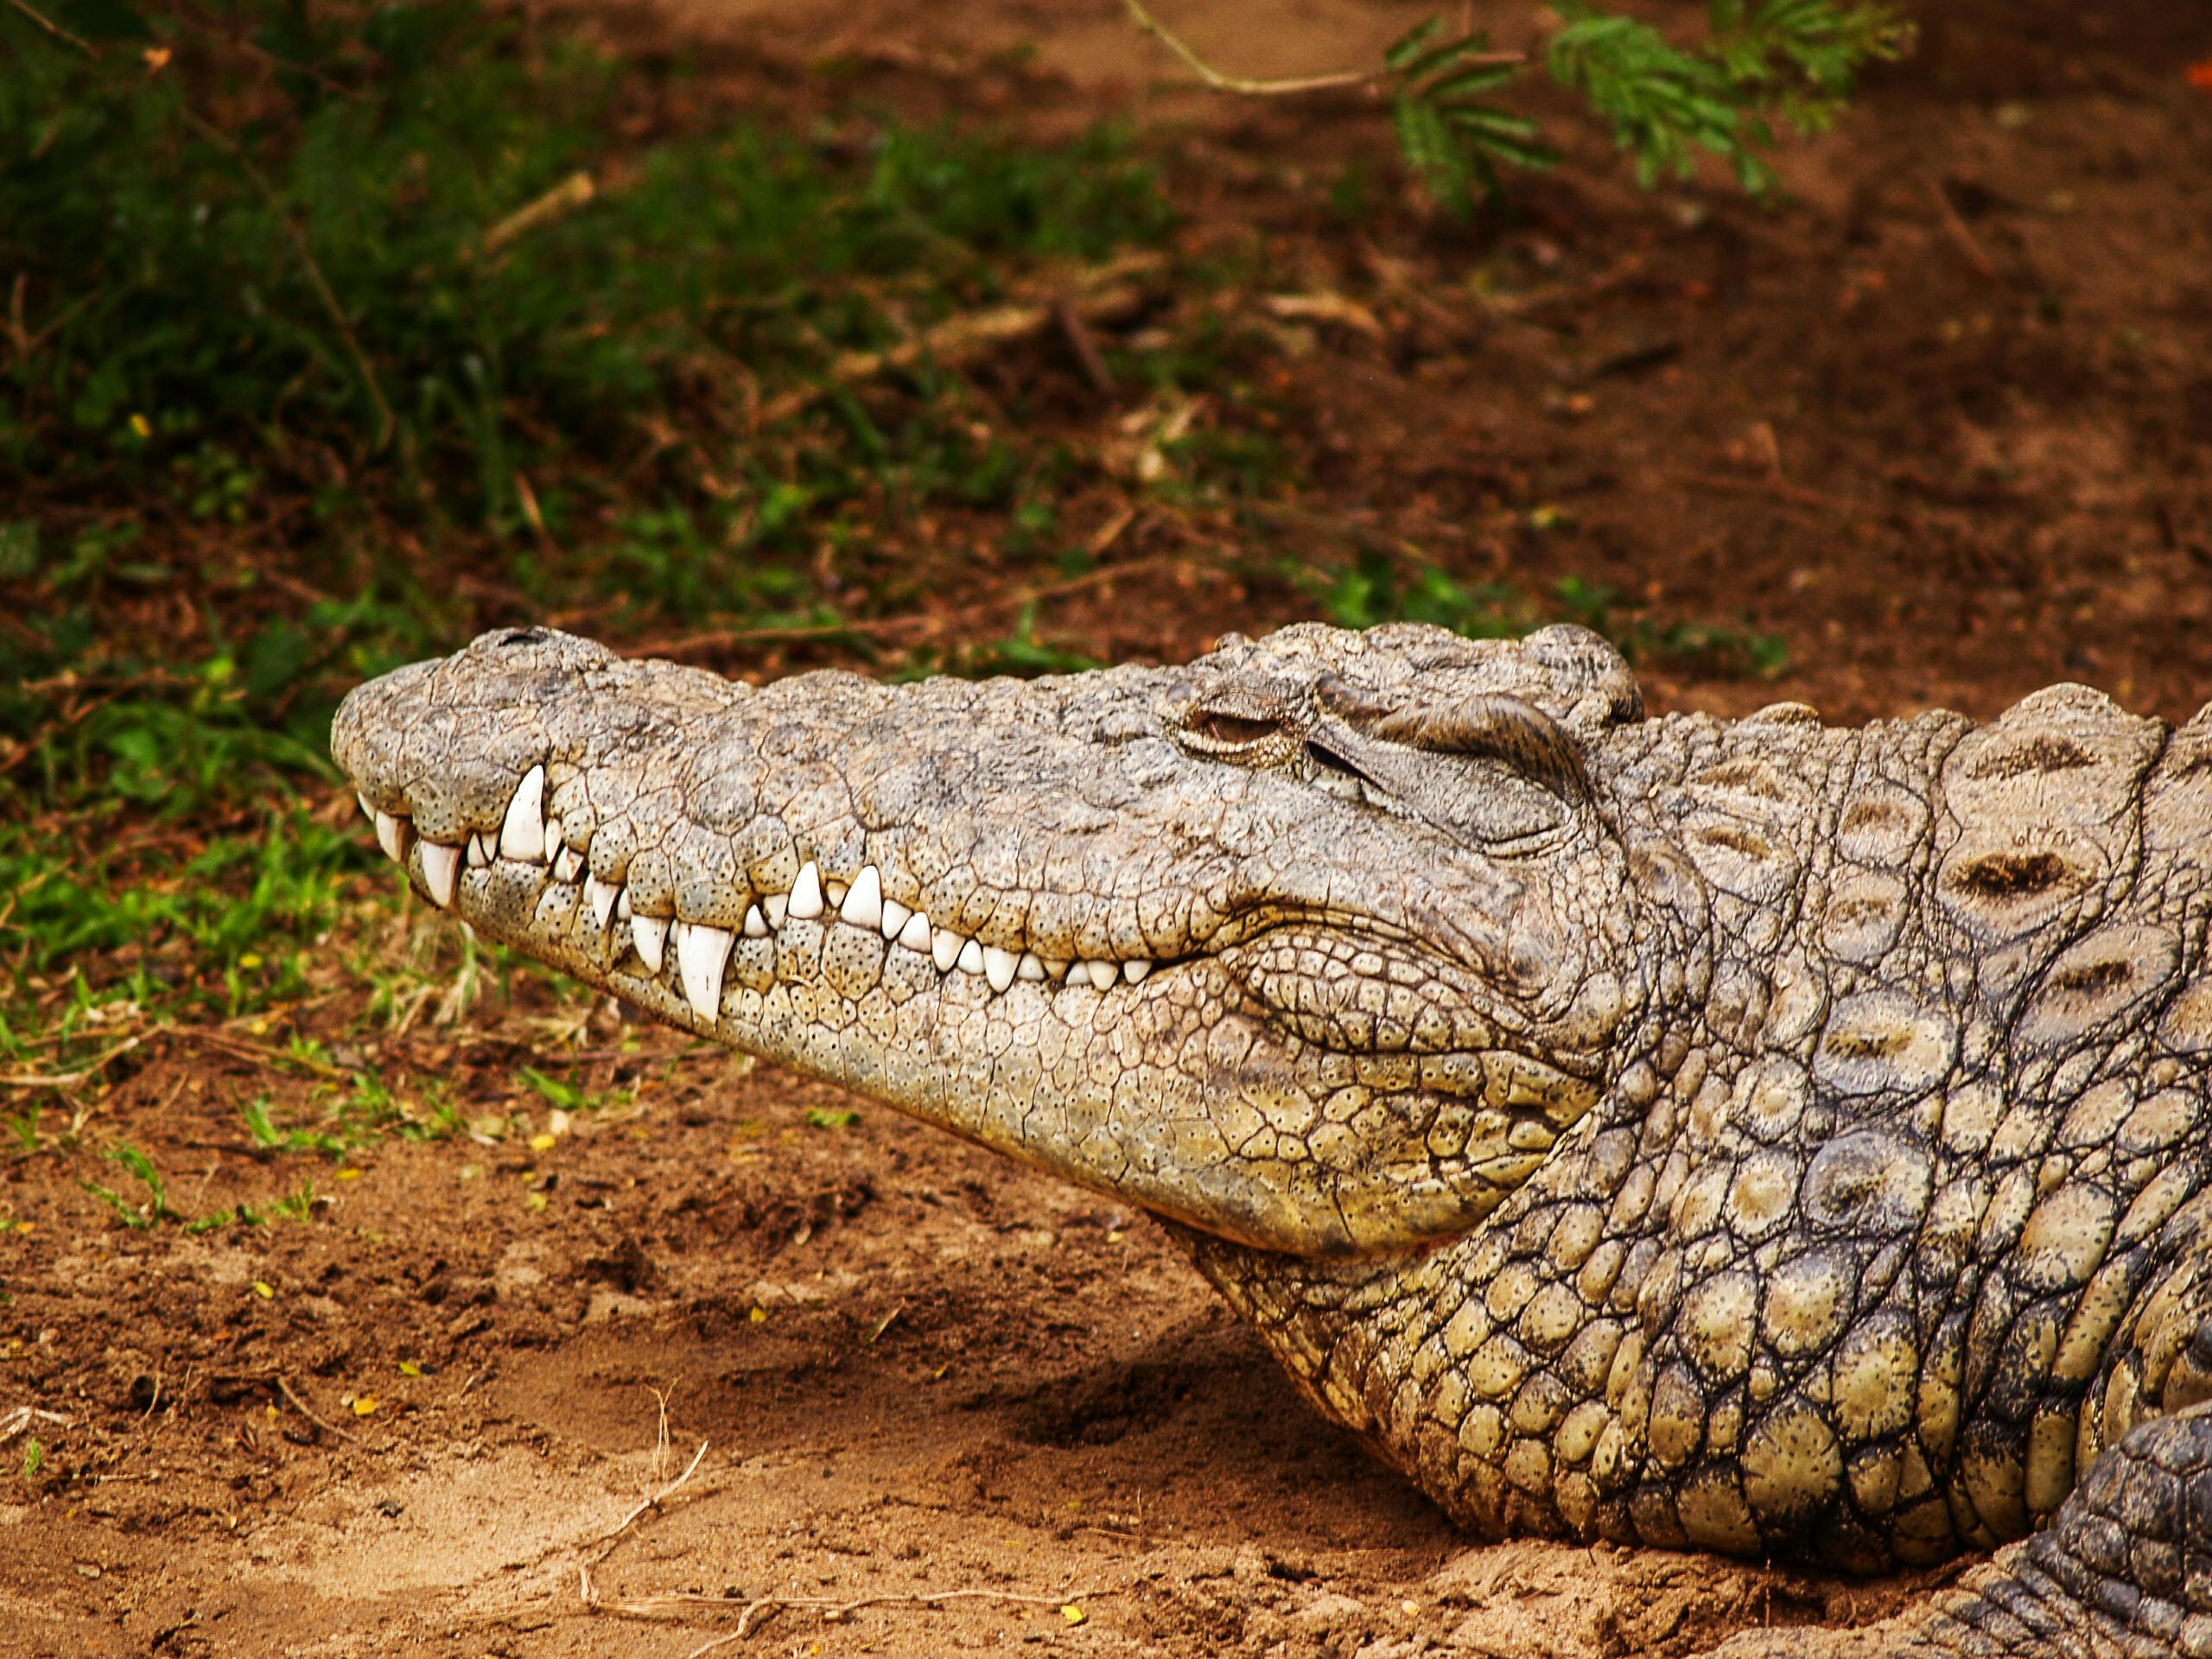 1,747 Crocodile Brand Royalty-Free Photos and Stock Images